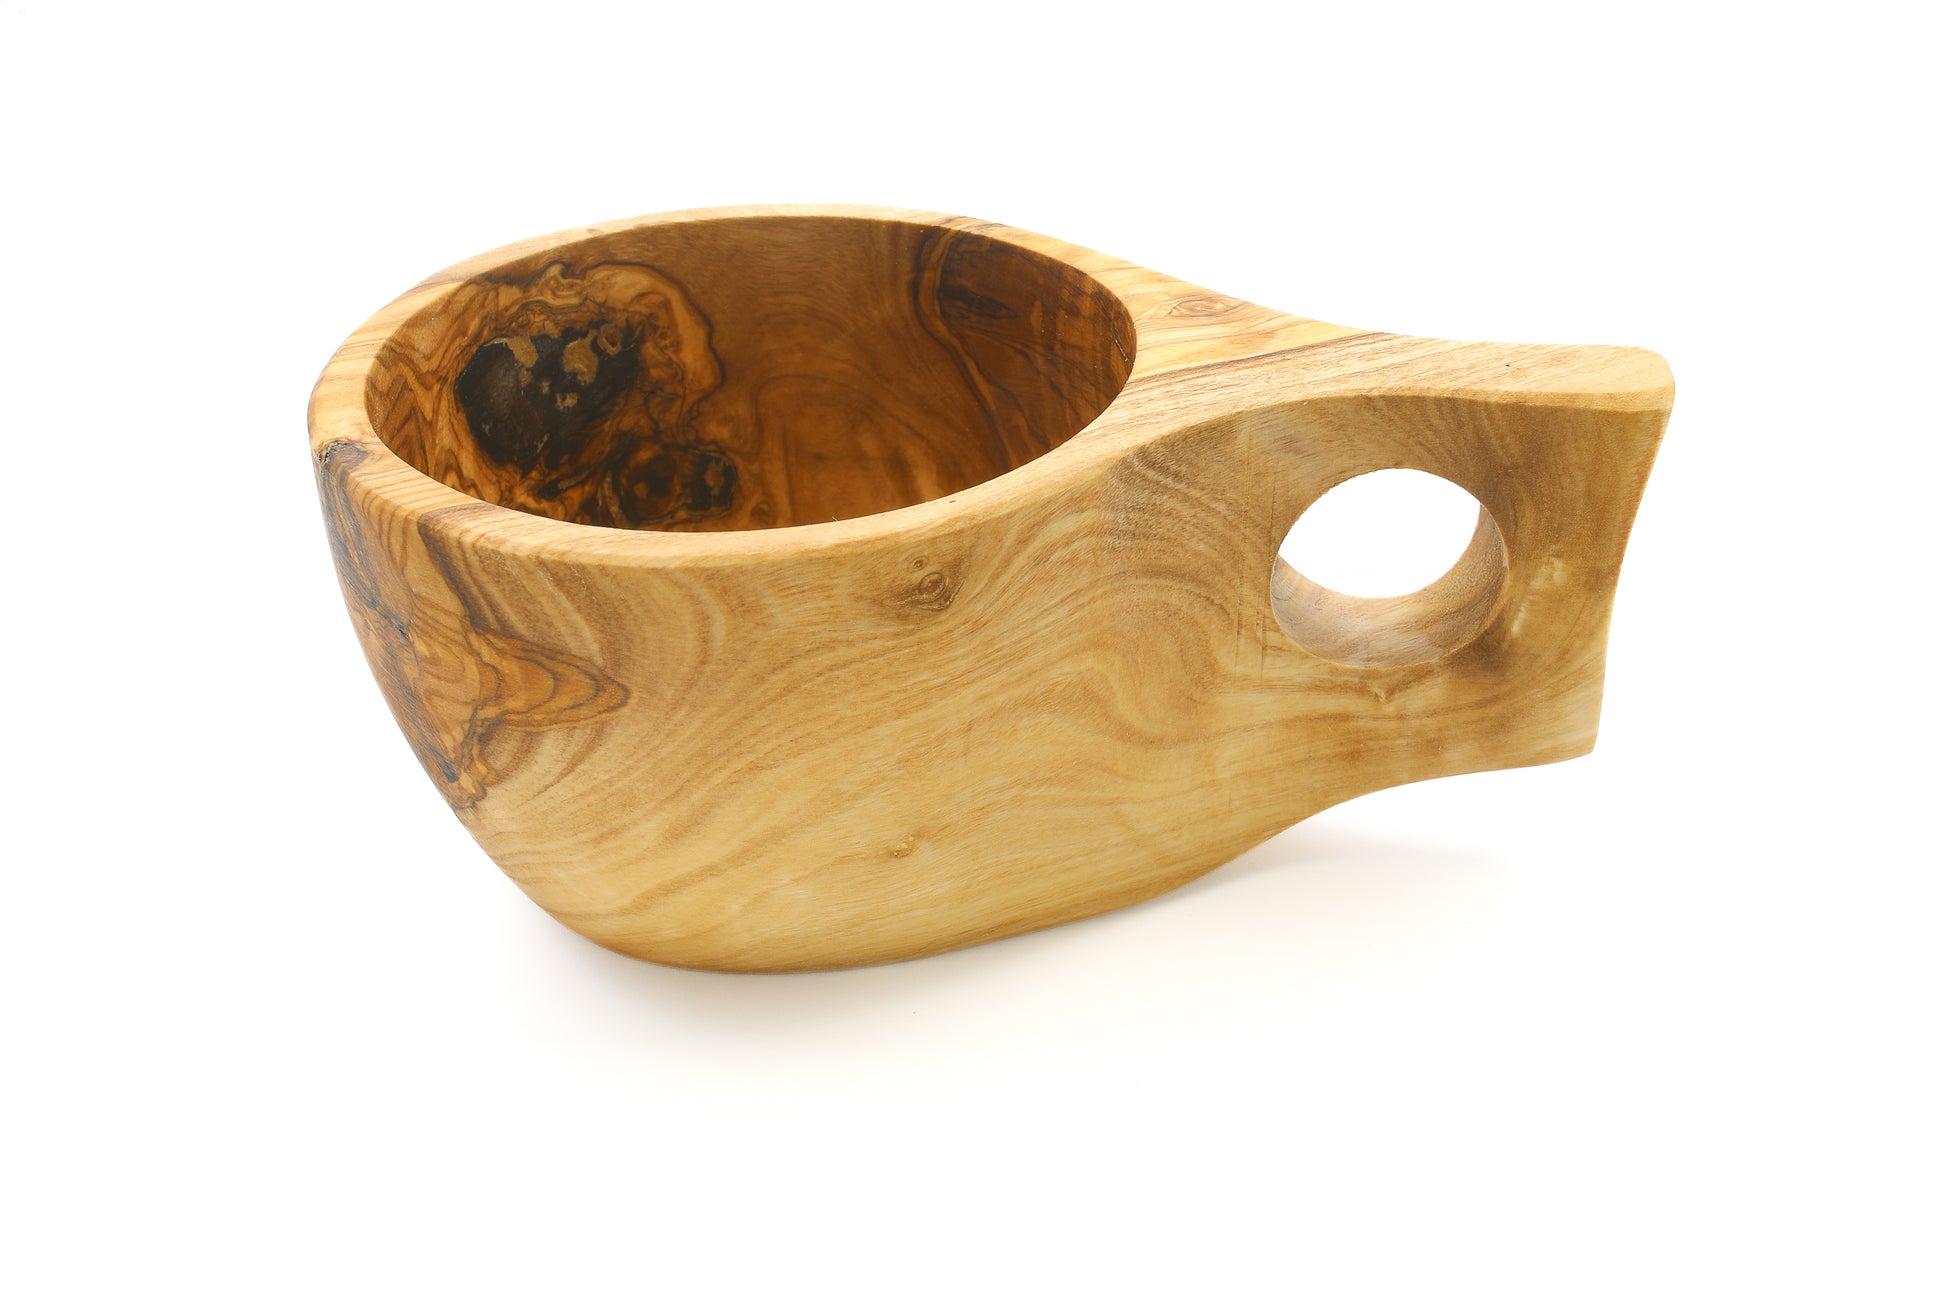 Olive wood kuksa for sipping your morning coffee